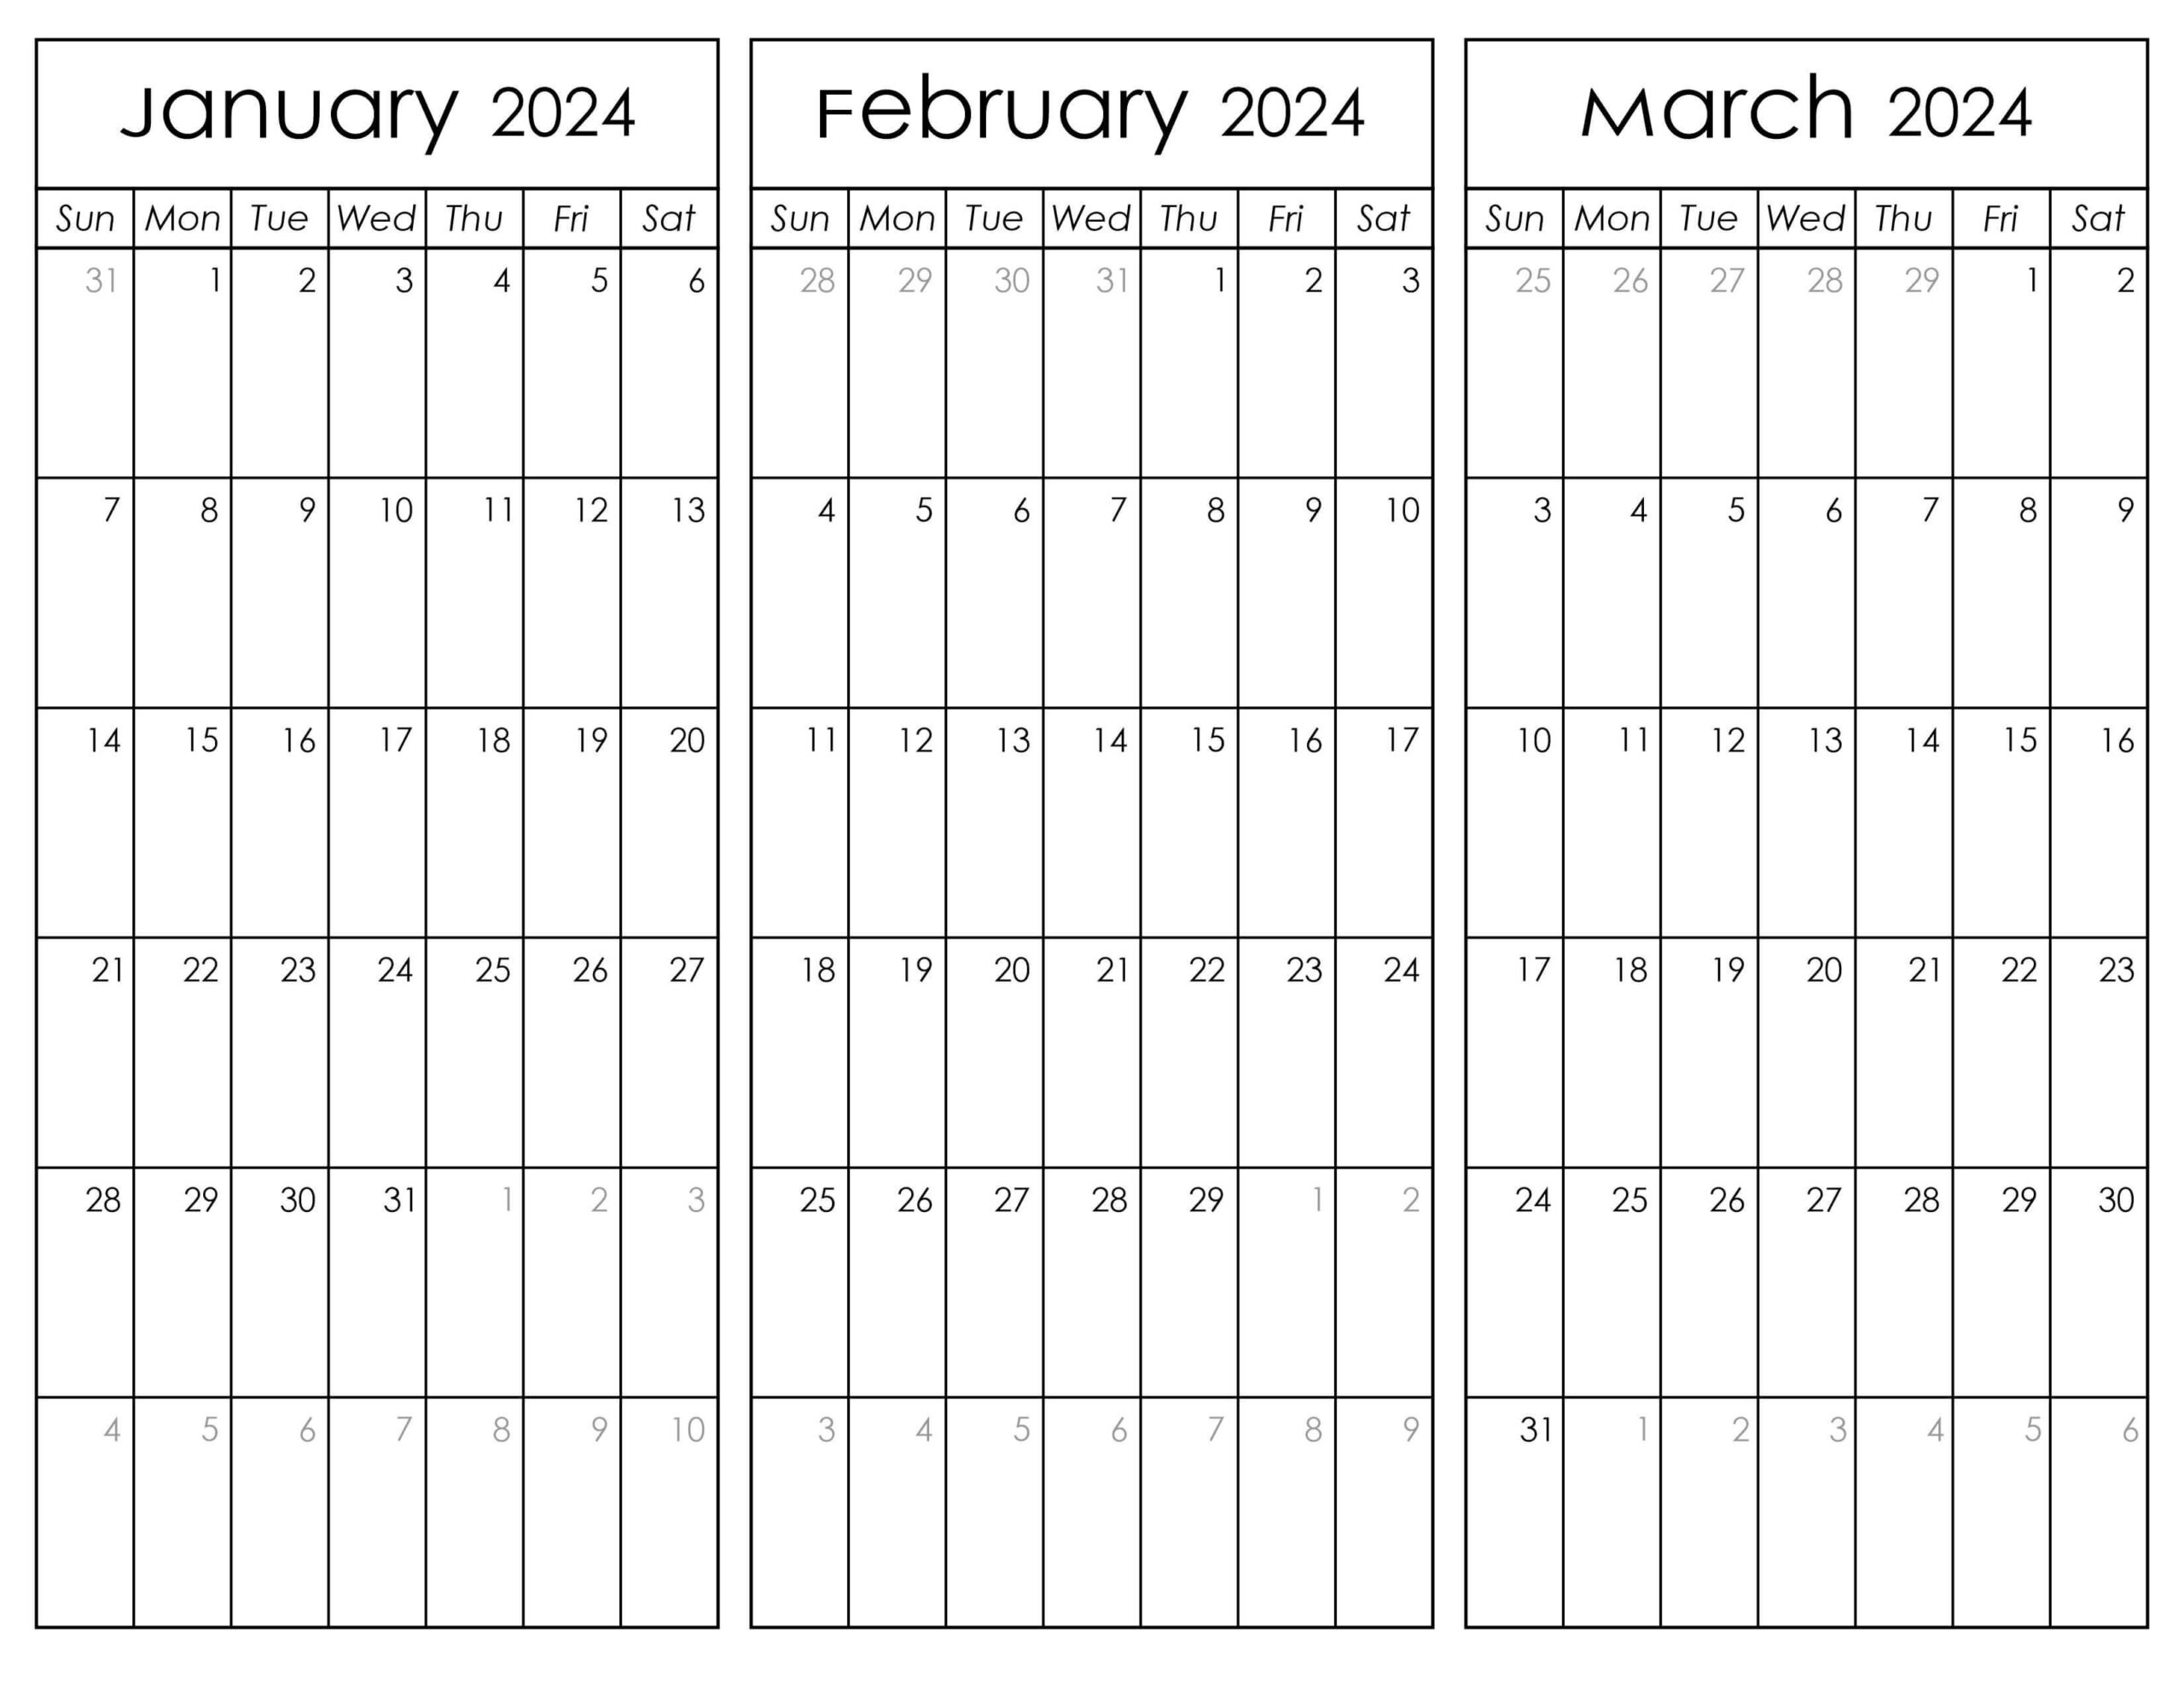 January February and March Calendar 2024